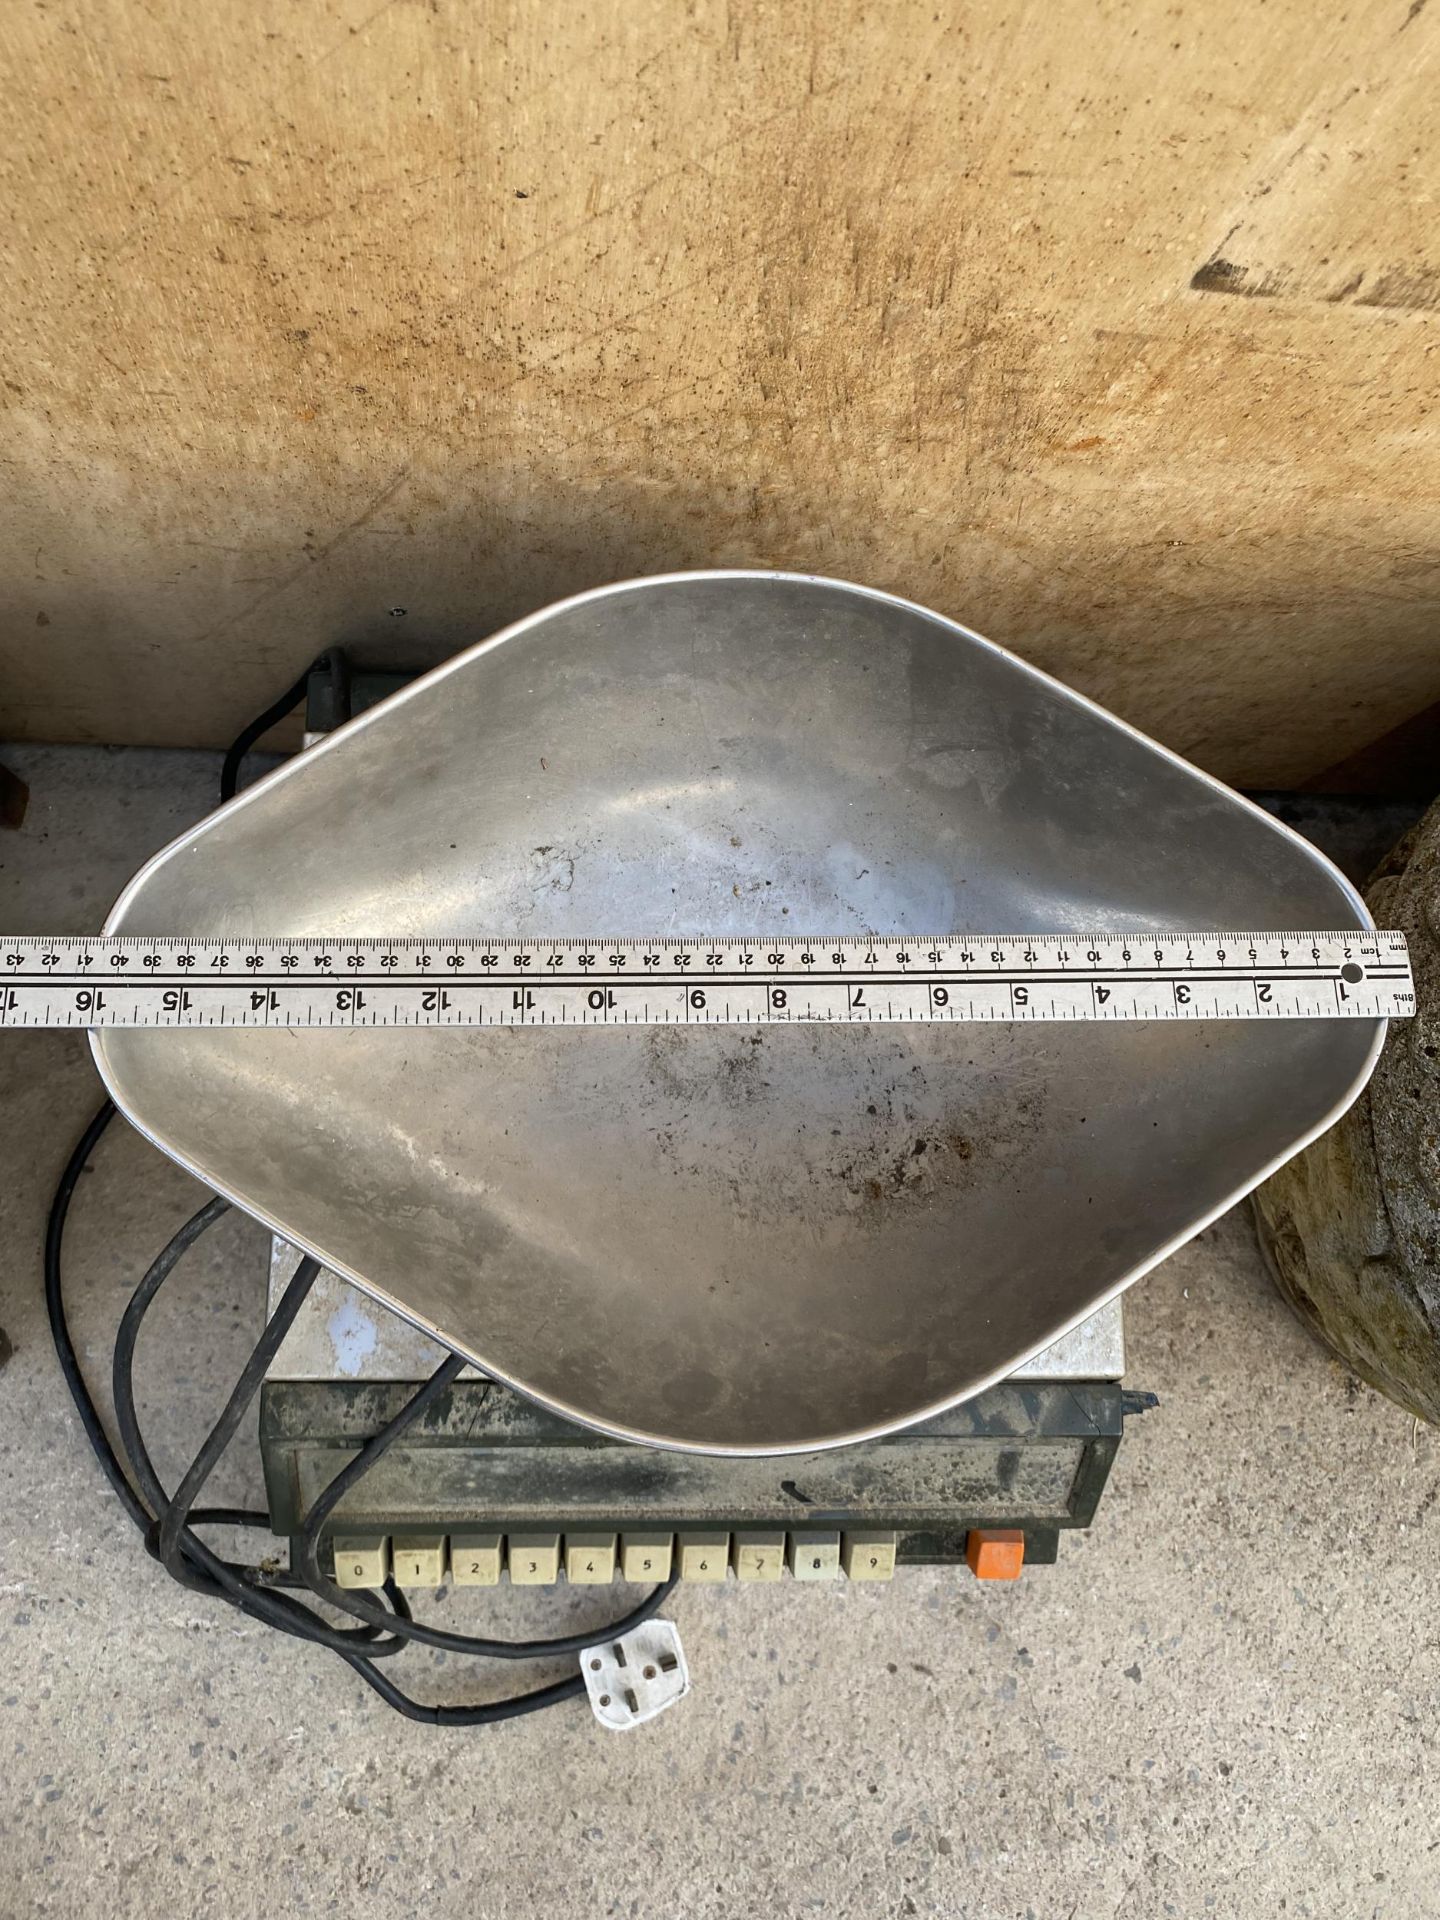 A SET OF RETRO/VINTAGE AVERY 1750 DIGITAL SHOP SCALES - Image 5 of 6